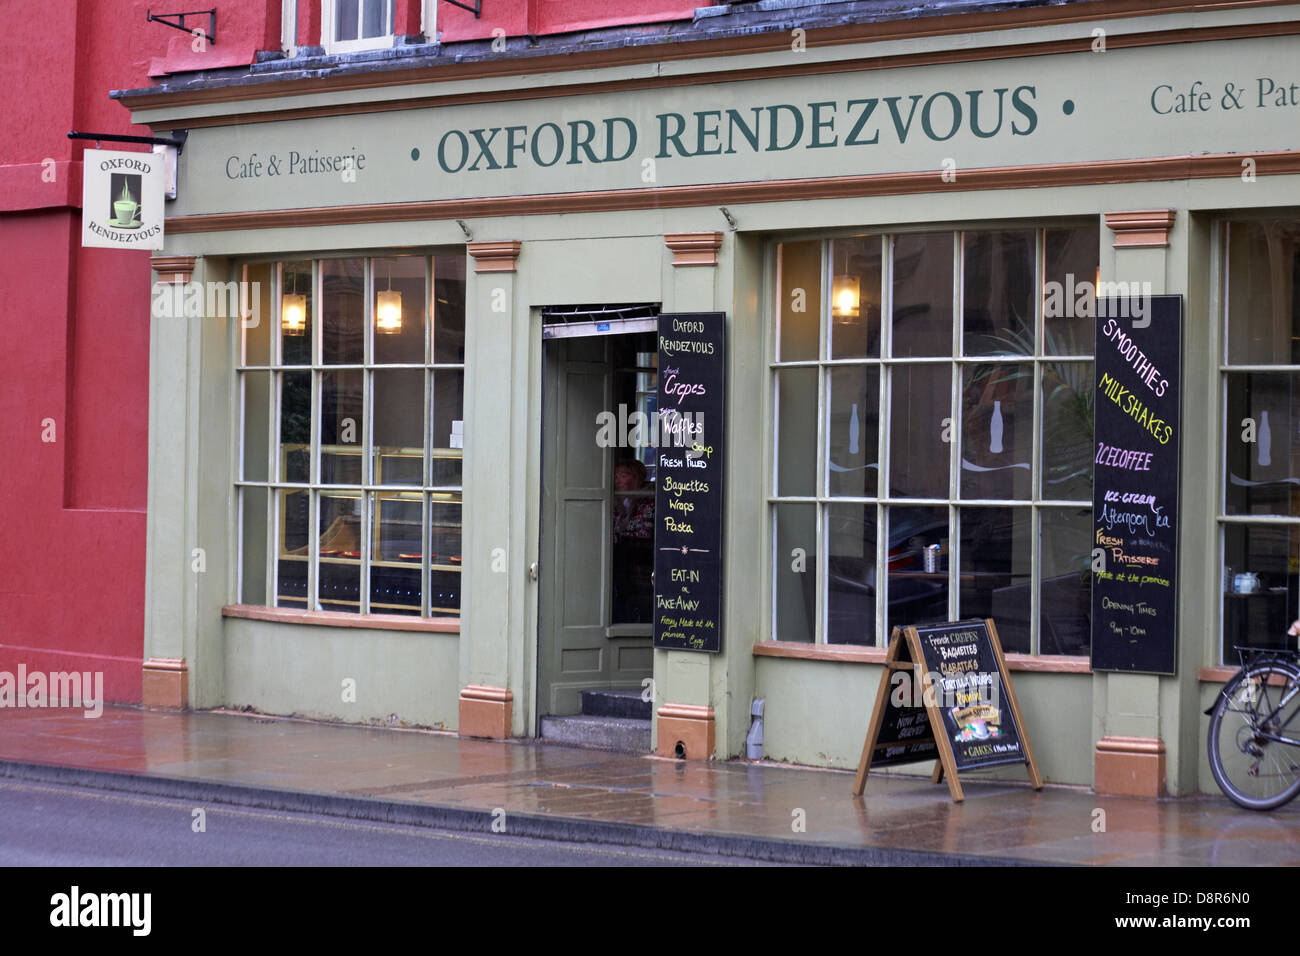 Oxford Rendezvous Café & Patisserie at Oxford, Oxfordshire UK in May Stock Photo